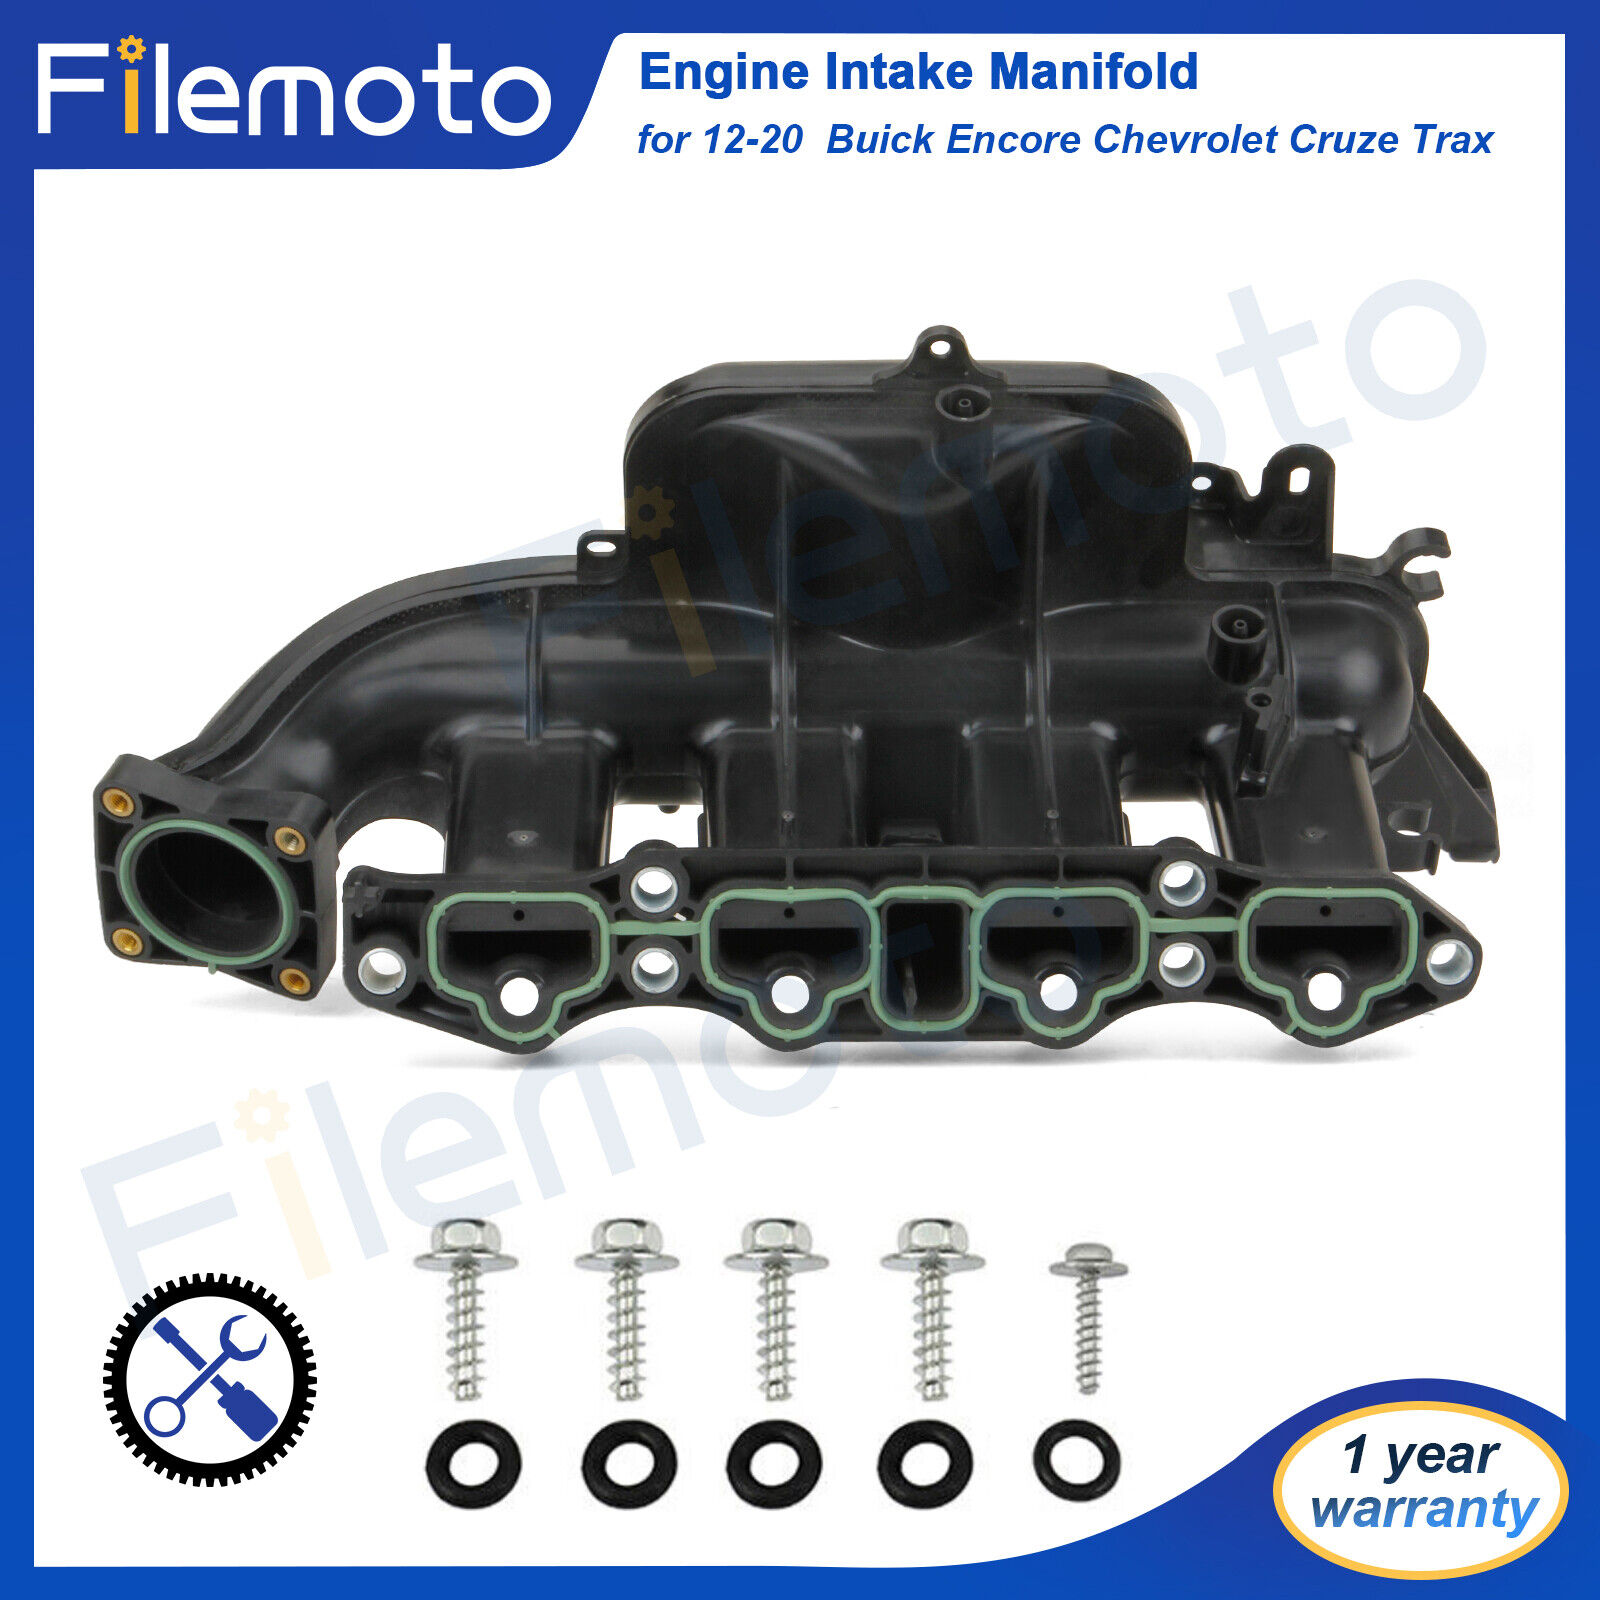 For 13-20 Buick Encore 12-20 Chevrolet Sonic Cruze Trax Engine Intake Manifold